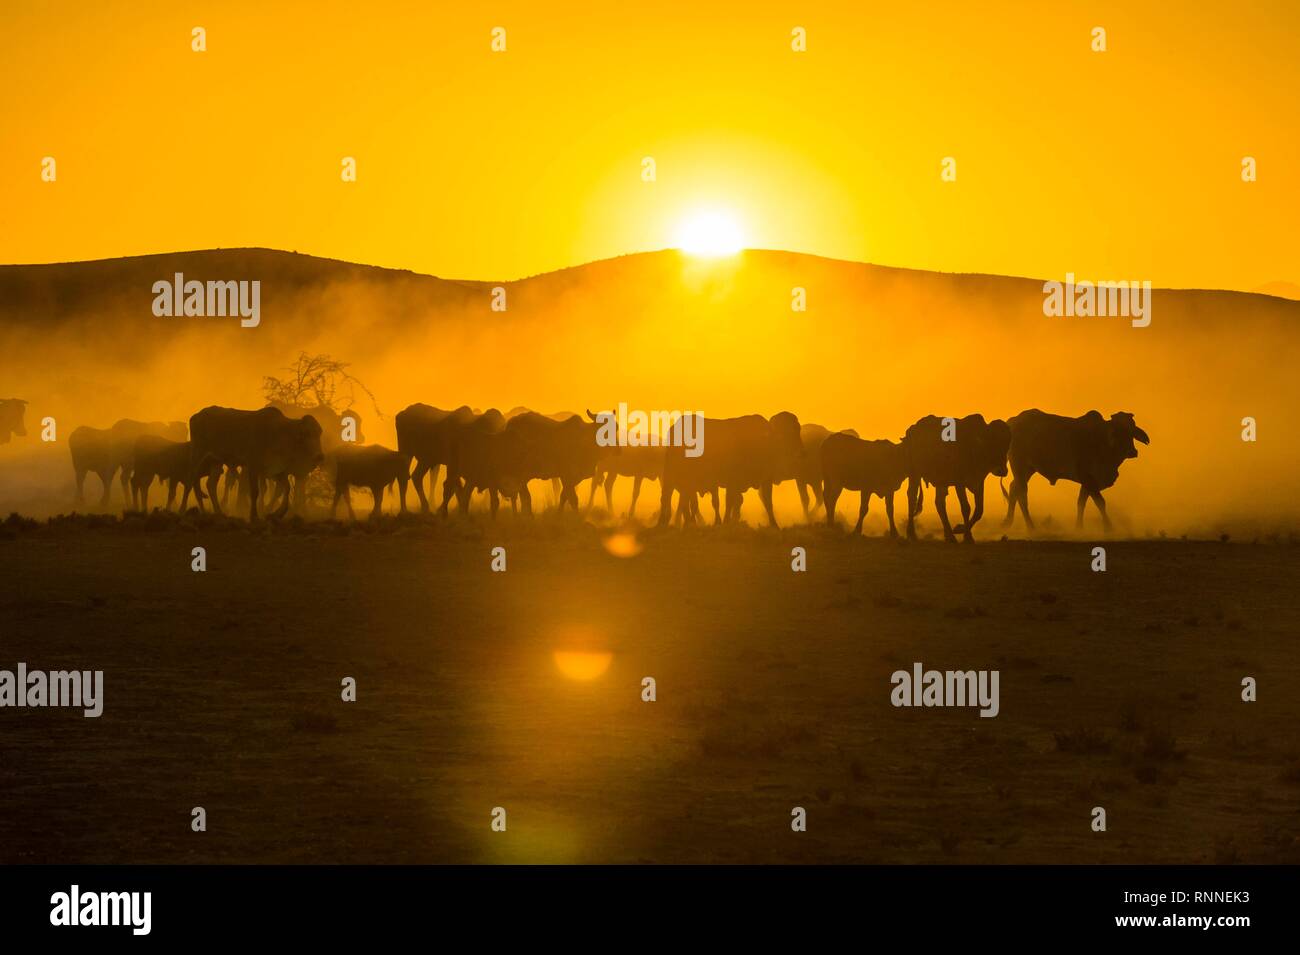 Silhouettes of cattle, herd walking in dusty savannah at sunset, Damaraland, Namibia Stock Photo